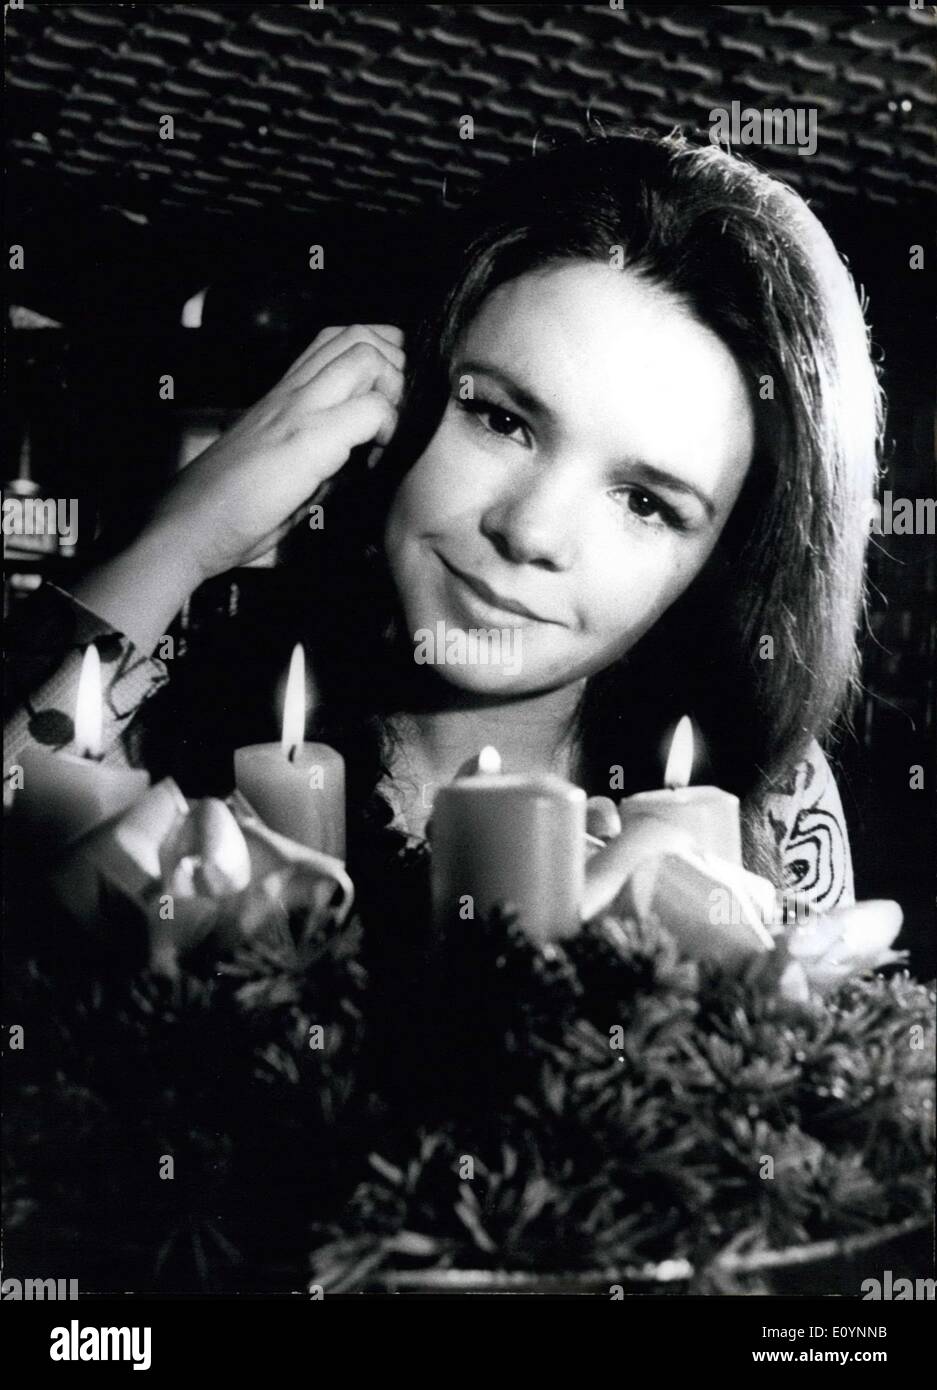 Dec. 15, 1970 - Irish Singer Dana at Munich's ''Christkindlmarkt''. Singer Dana enjoyed her 'shopping walk' at Munich's ''Christkindlmarkt'' like a child. the 20 year old Irish girl, with the song ''All kinds of everything'' winner of the Grand Prix song festival 1970 was not only surprised by all the little things but she also bought many things: many Christmas tree balls and other decorations for the huge Christmas tree in her home town Londonderry, gingerbread and almonds as taste for herself. Dana Brown, accompanied by her father, who is her manager, came to Munich in business matter Stock Photo